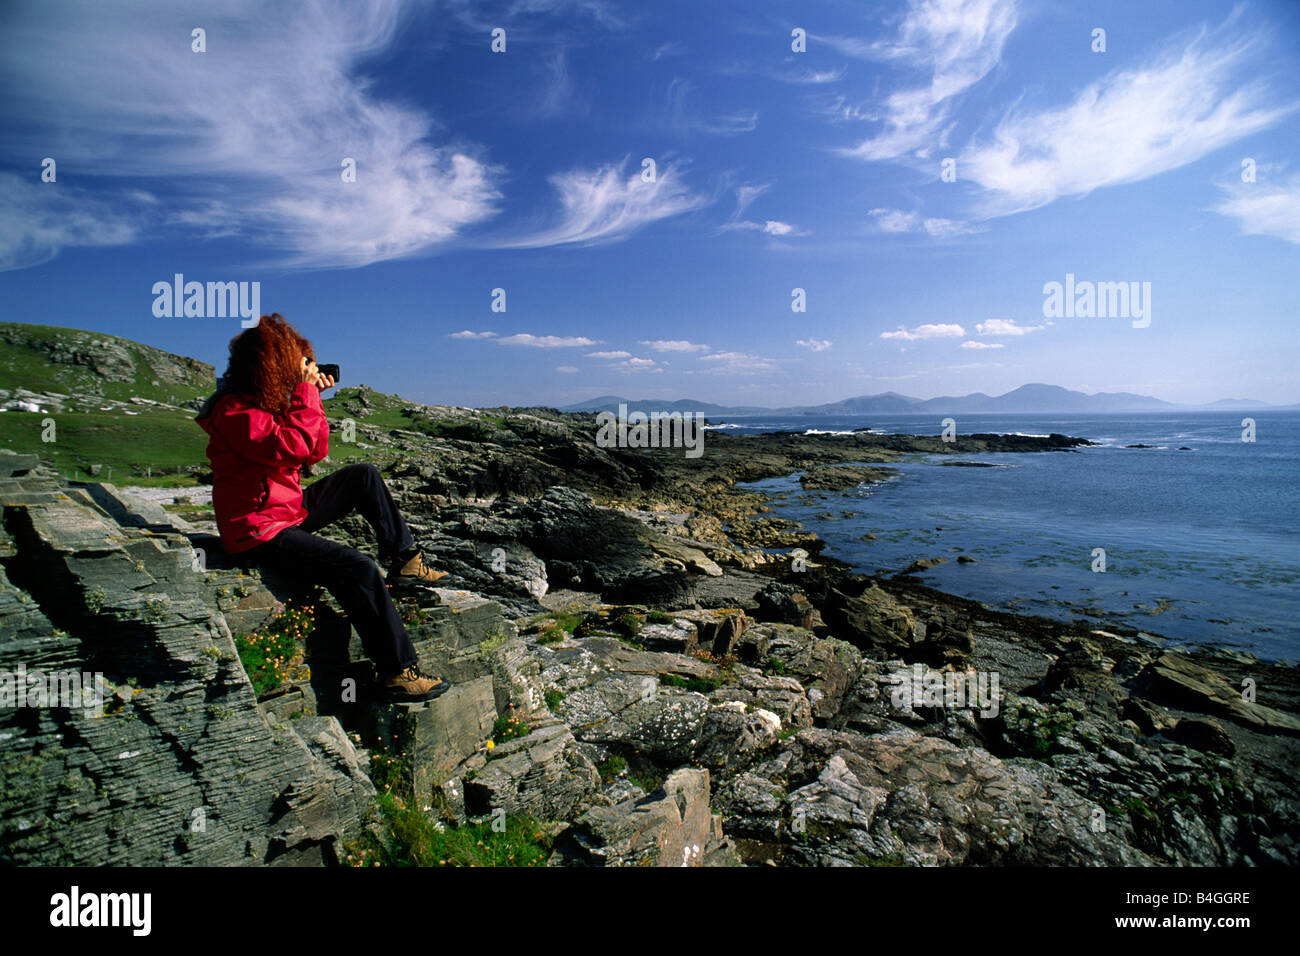 Ireland, County Donegal, Malin Head, the most northerly point in Ireland, girl taking pictures Stock Photo